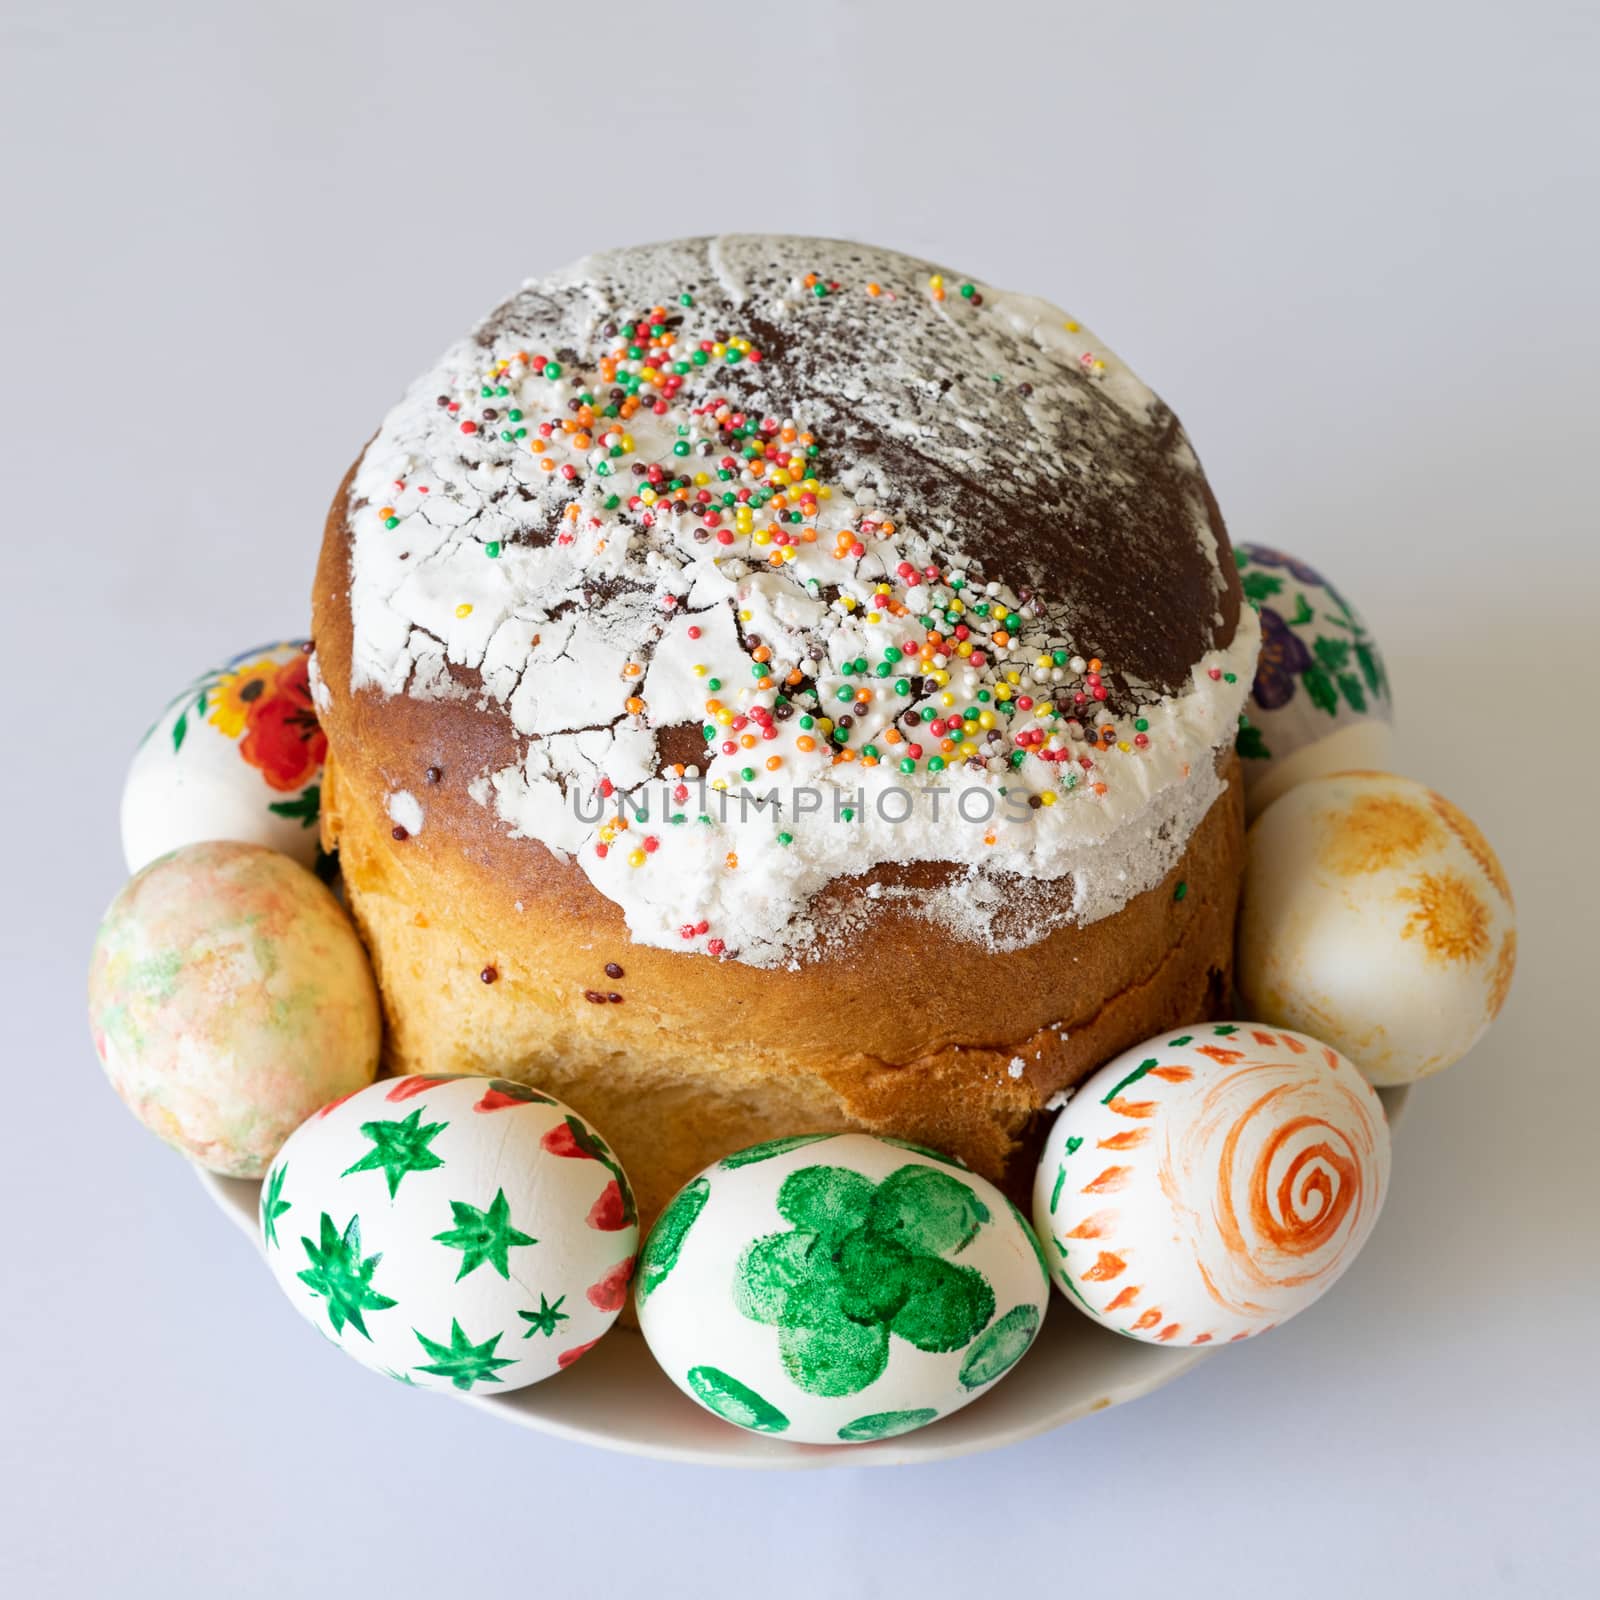 beautiful festive Easter cake with colorful eggs on the plate by Serhii_Voroshchuk